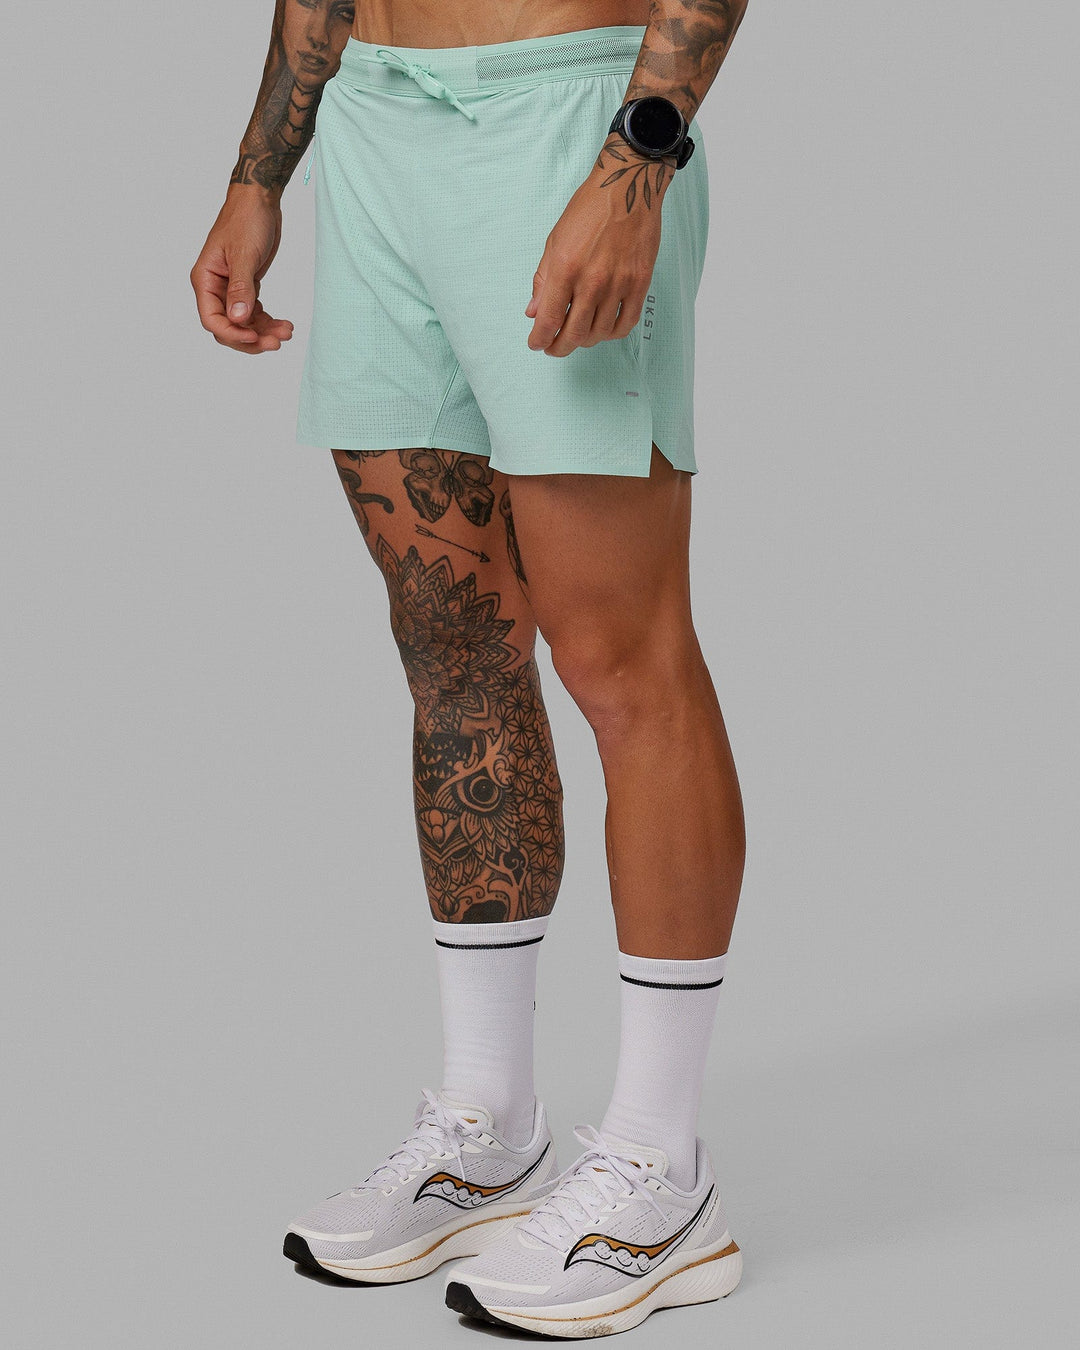 Man wearing UltraAir 5" Lined Performance Short - Pastel Turquoise-Reflective